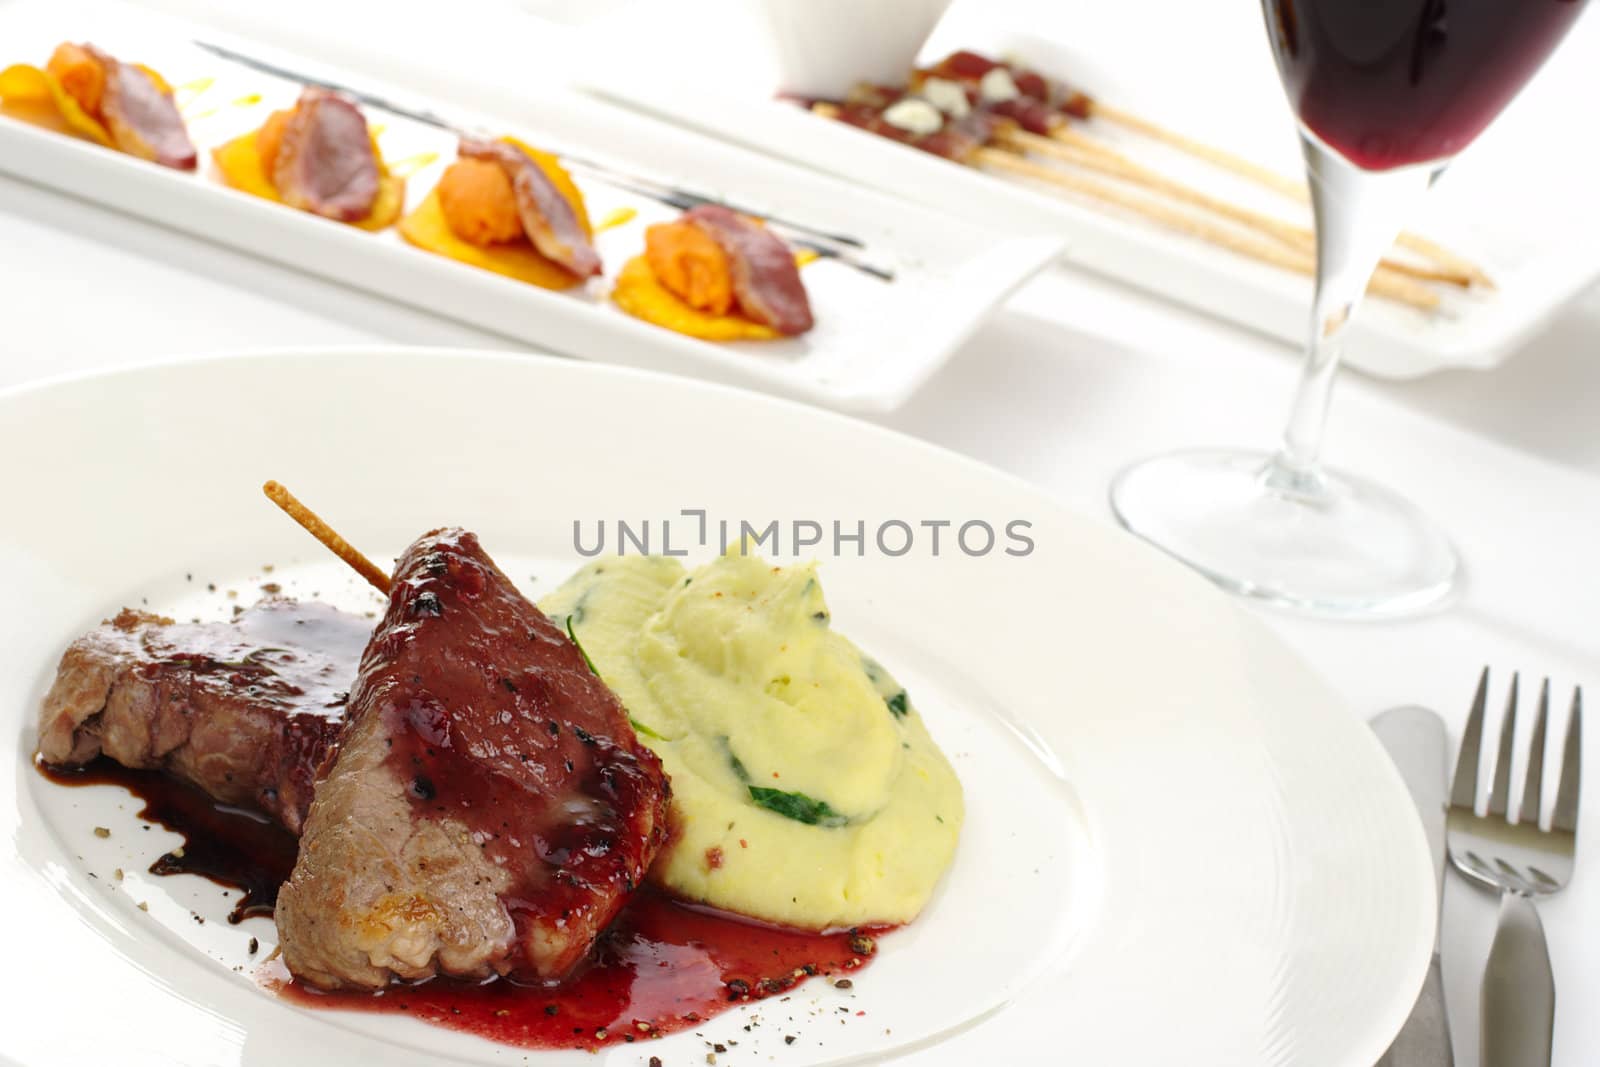 Main dish: Meat with red pepper sauce and mashed potato with cutlery as well as appetizers and red wine in the background  (Selective Focus, Focus on the meat)